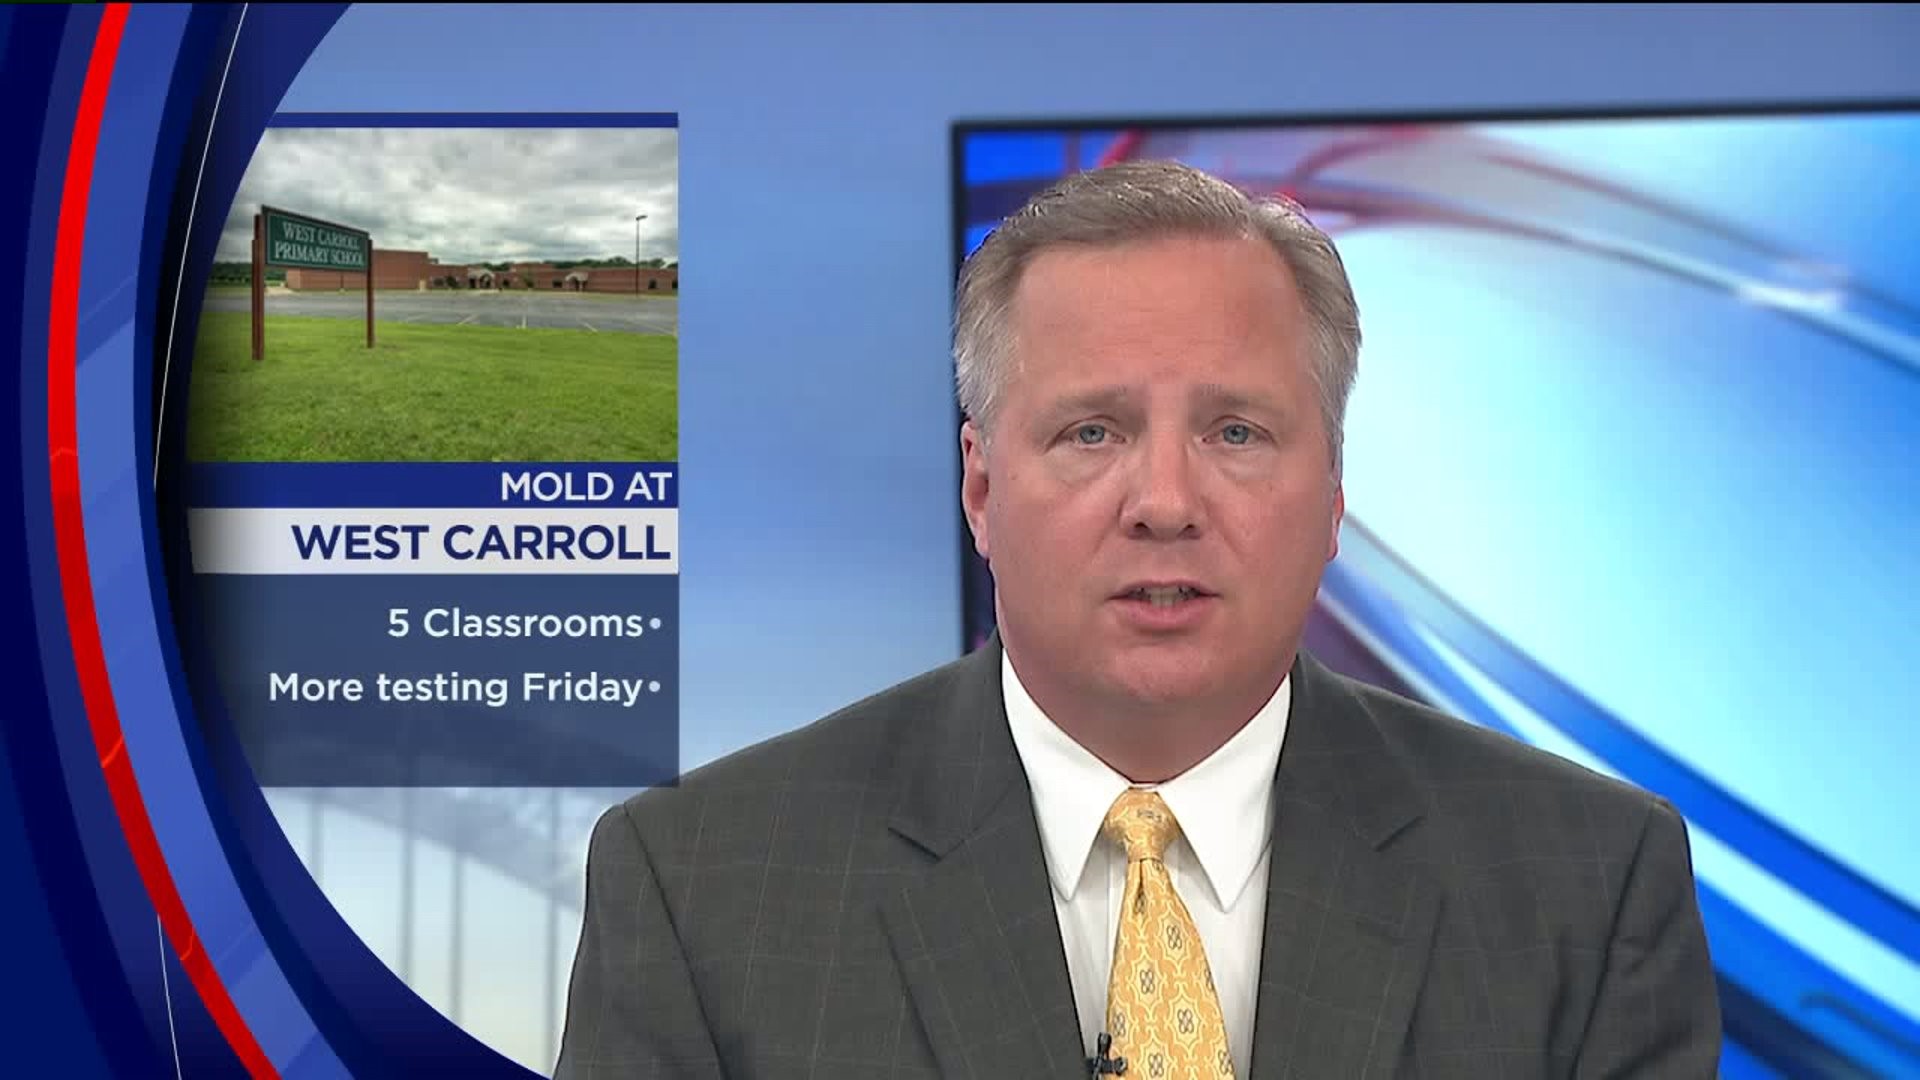 Mold found in classrooms at West Carroll Primary school